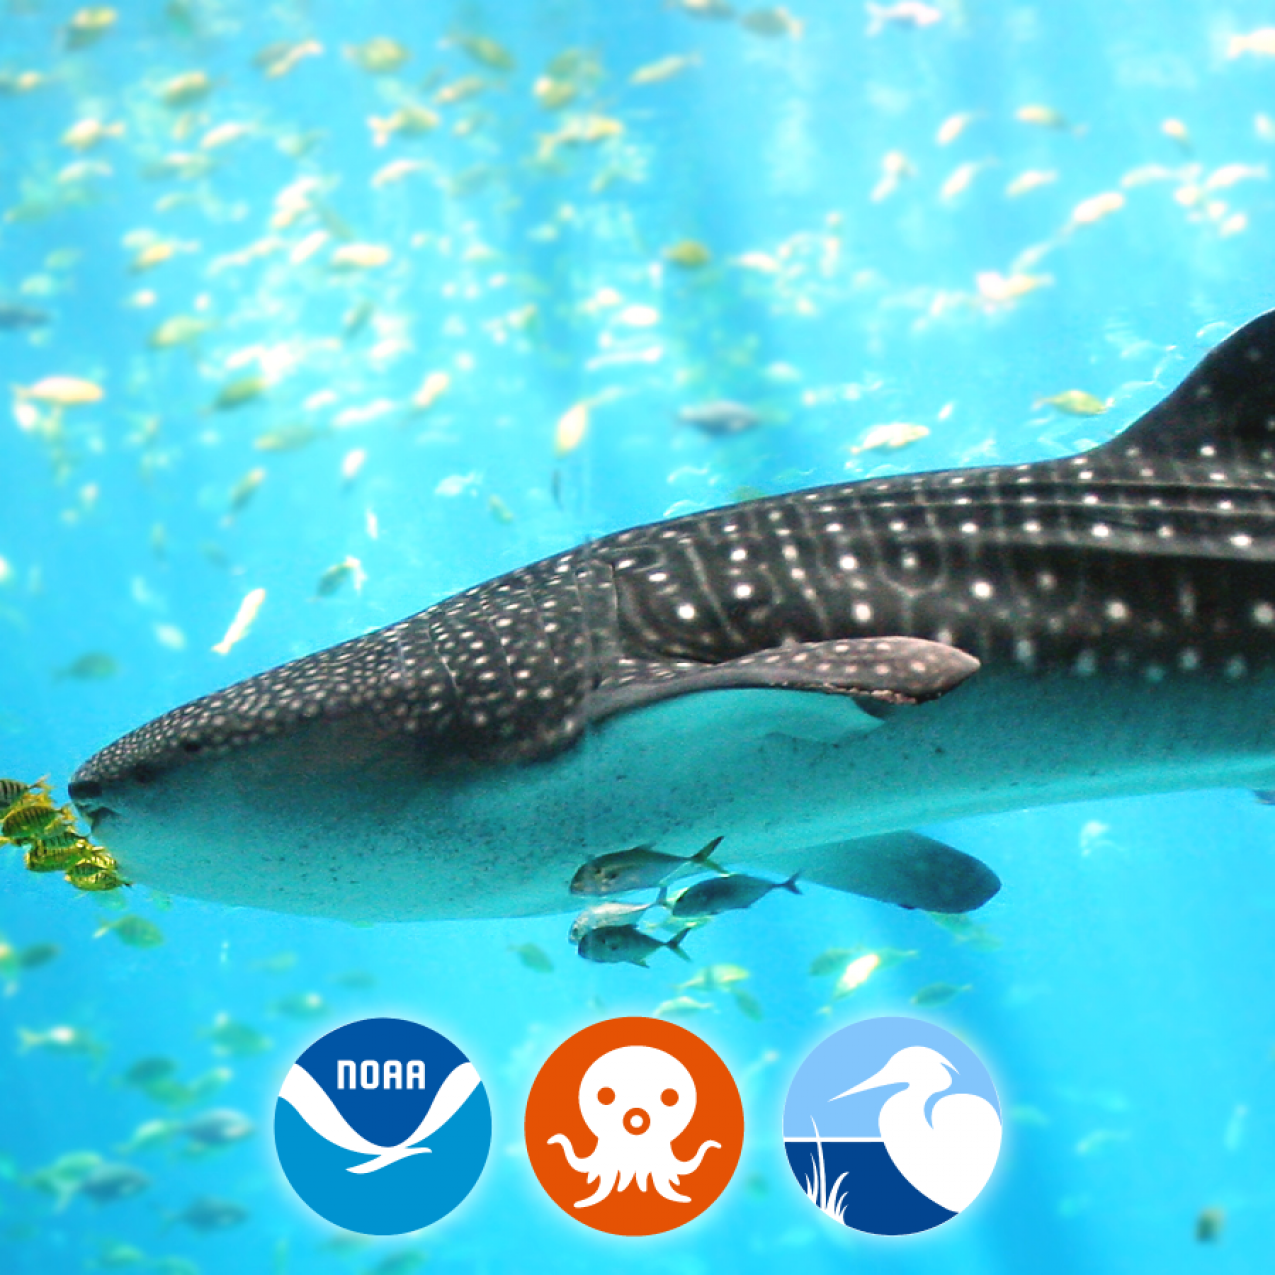 Episode 1: The Whale Shark
Educators from the Aquarium of the Pacific answer our questions about the Octonauts' adventure with a whale shark and teach us how to help protect whale sharks in real life.